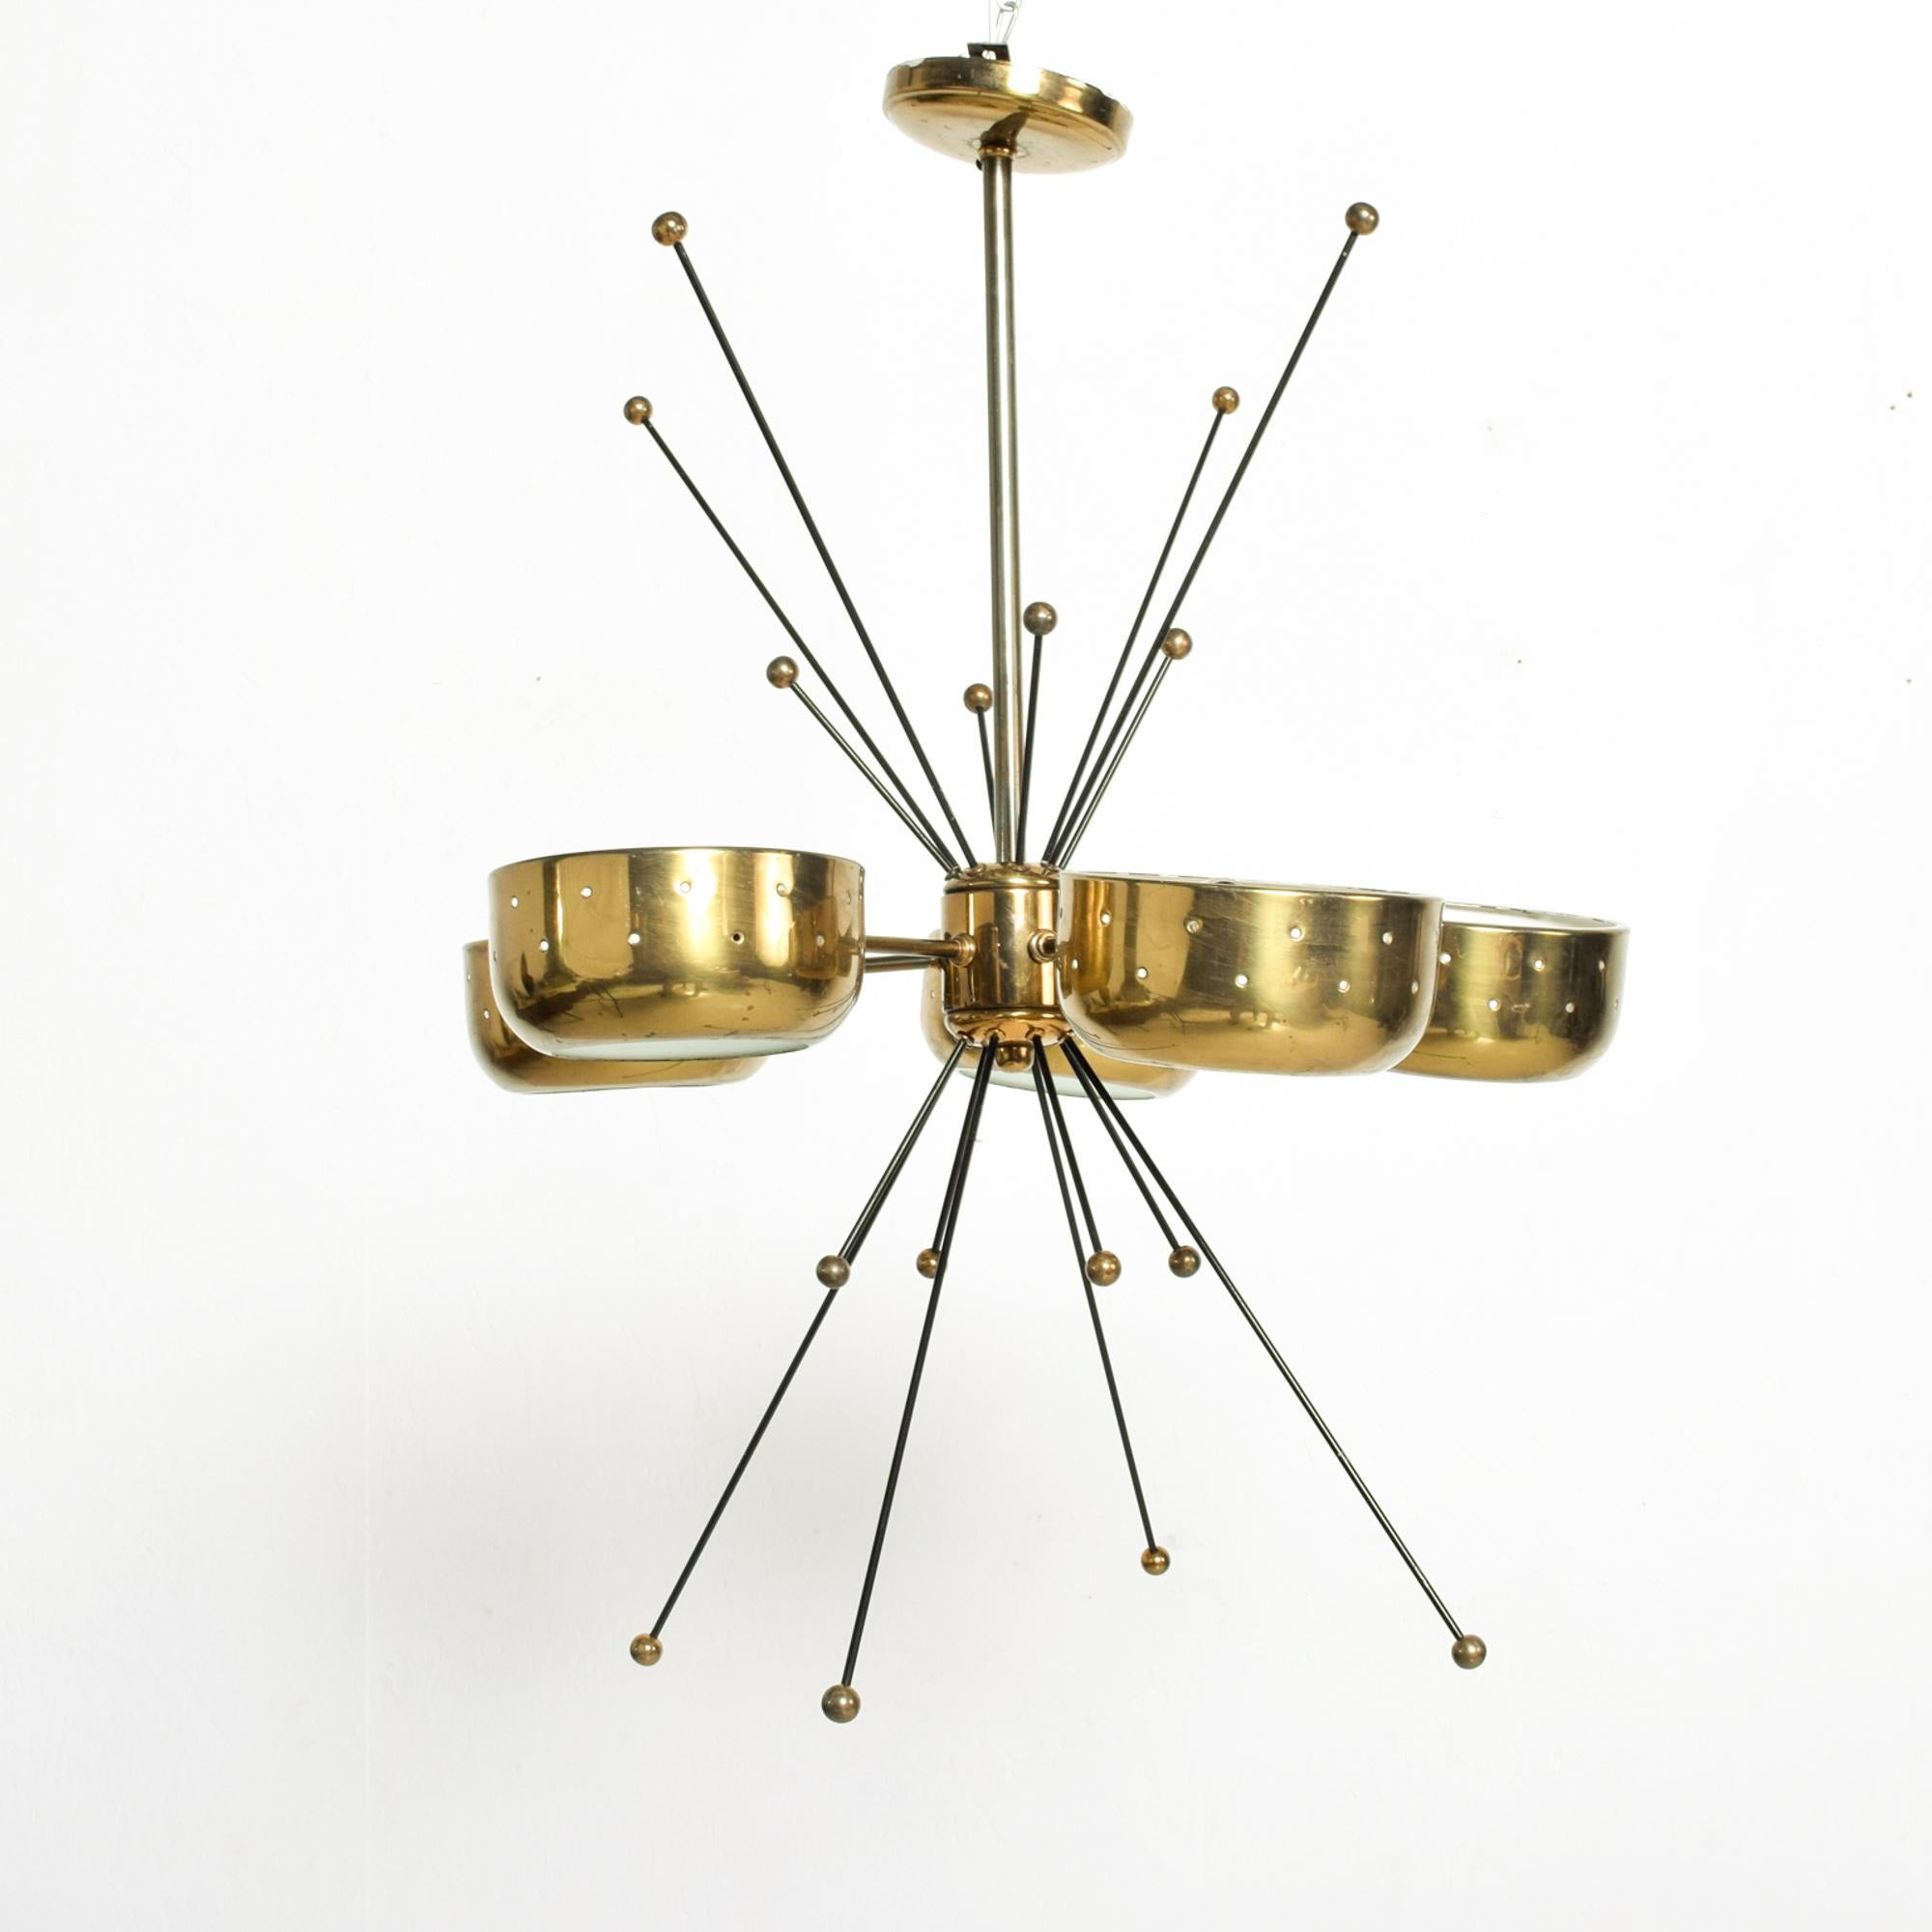 Elegant Sputnik chandelier made in Italy circa 1960s. Crafted in cups of brass, glass and iron rods.
Features five perforated brass shades. Spectacular presence.
Unmarked, attributed to style of Finnish designer Paavo Tynell.
Dimensions: 29